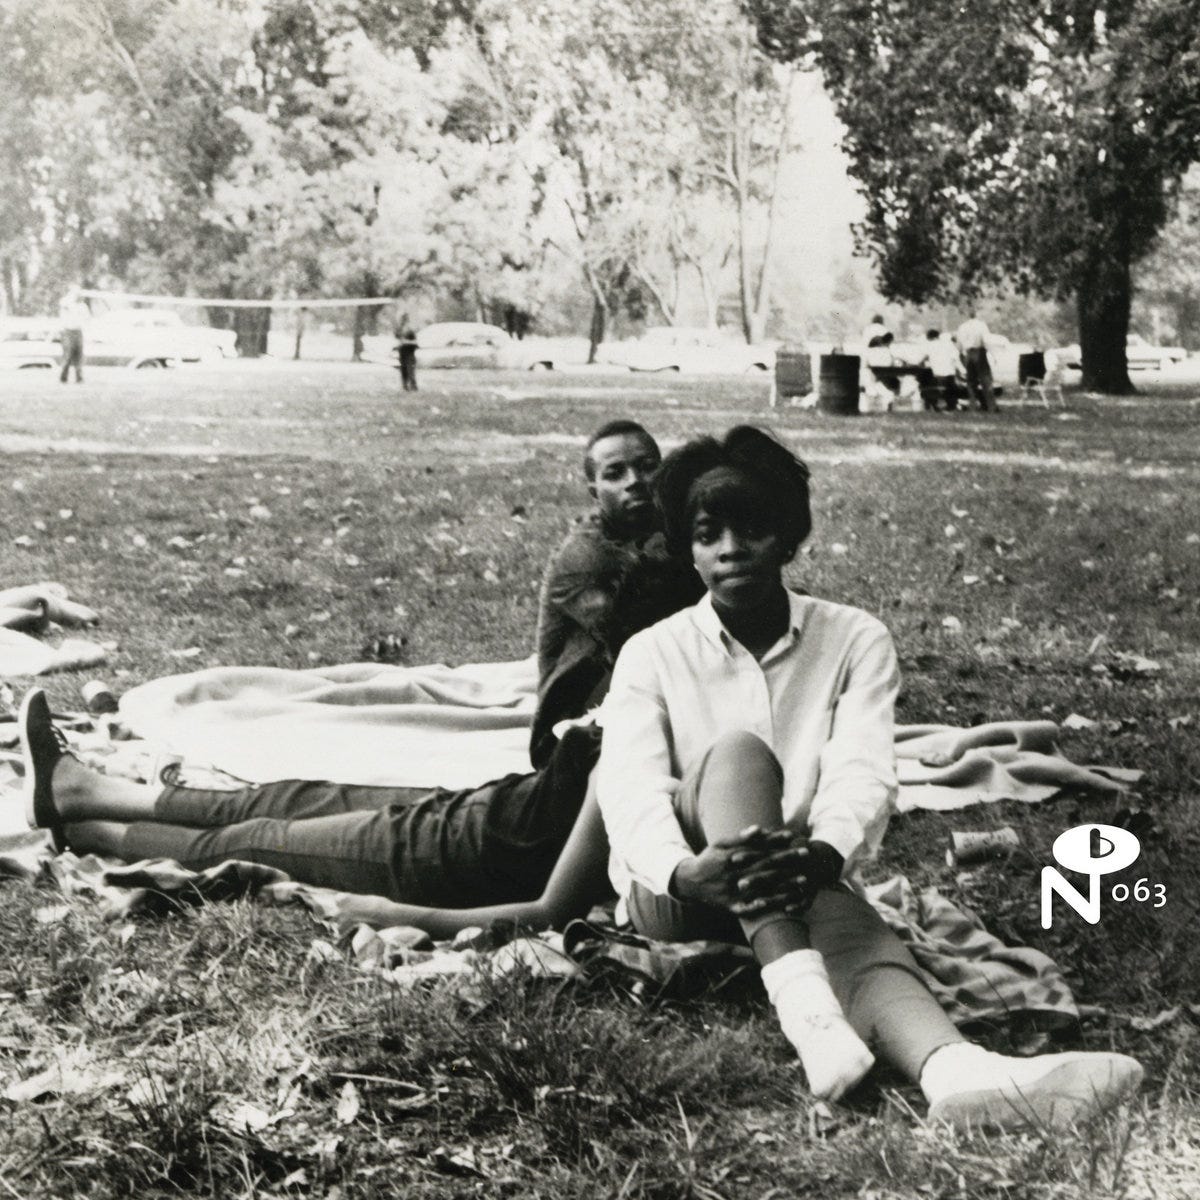 Eccentric Soul: Sitting in the Park | Various Artists | Eccentric Soul